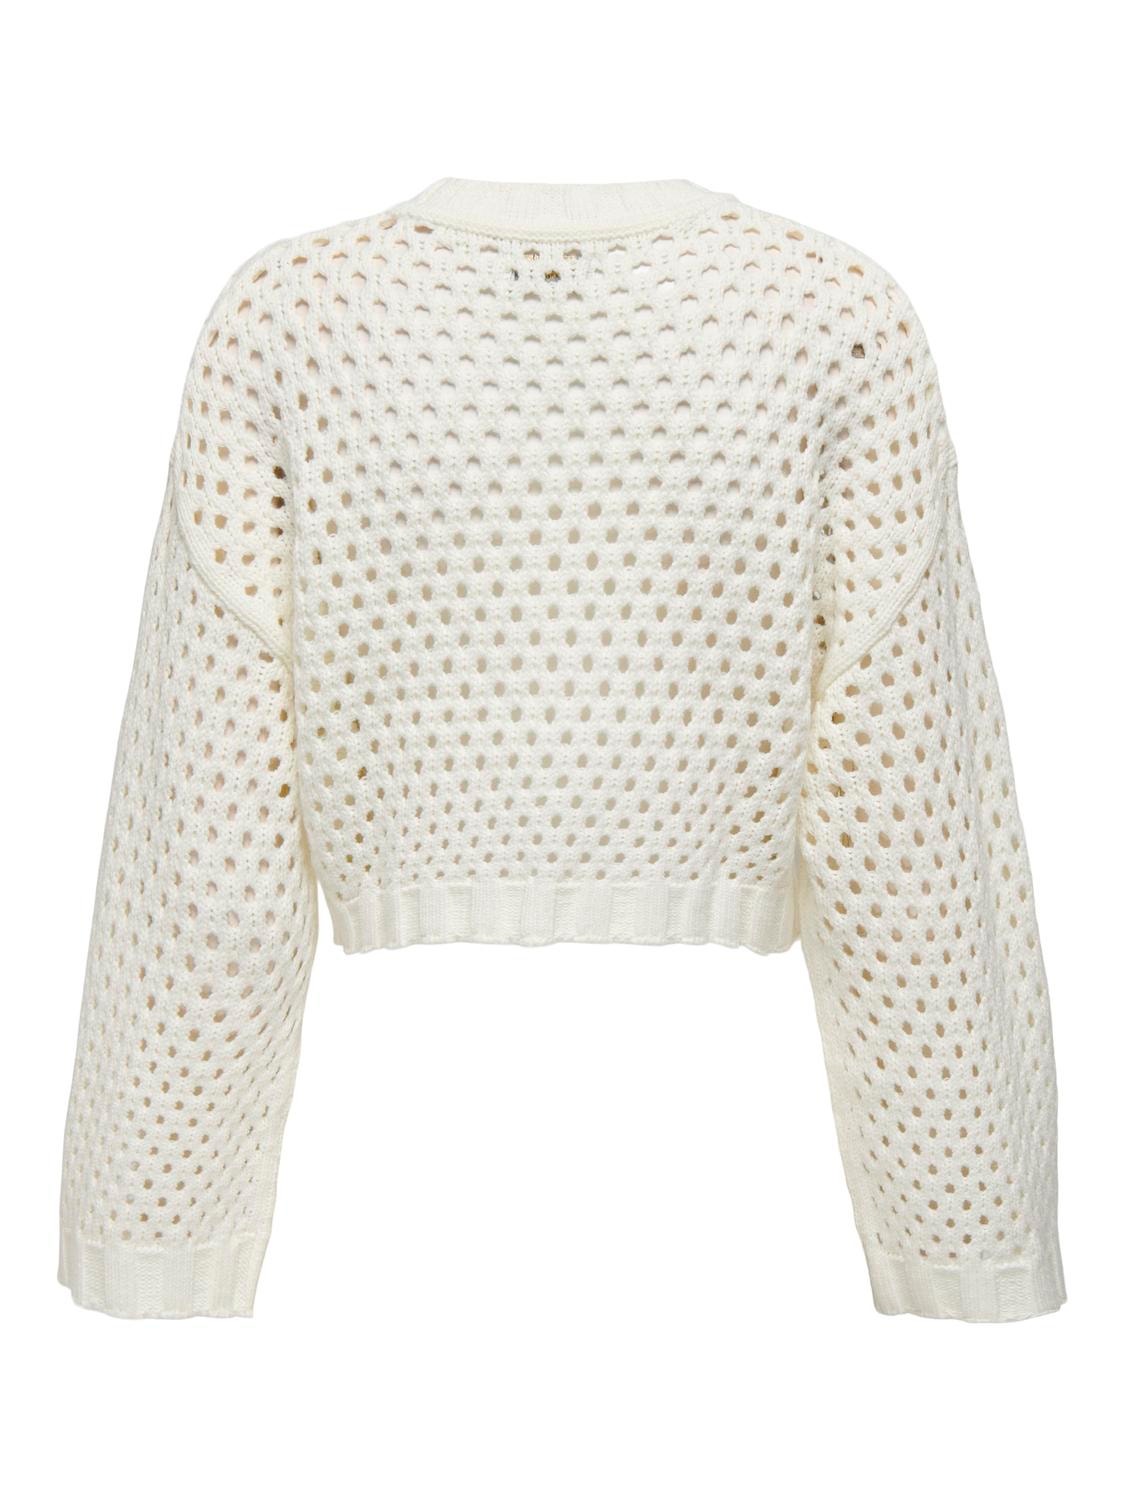 ONLY Cropped knit pullover -Marshmallow - 15300575